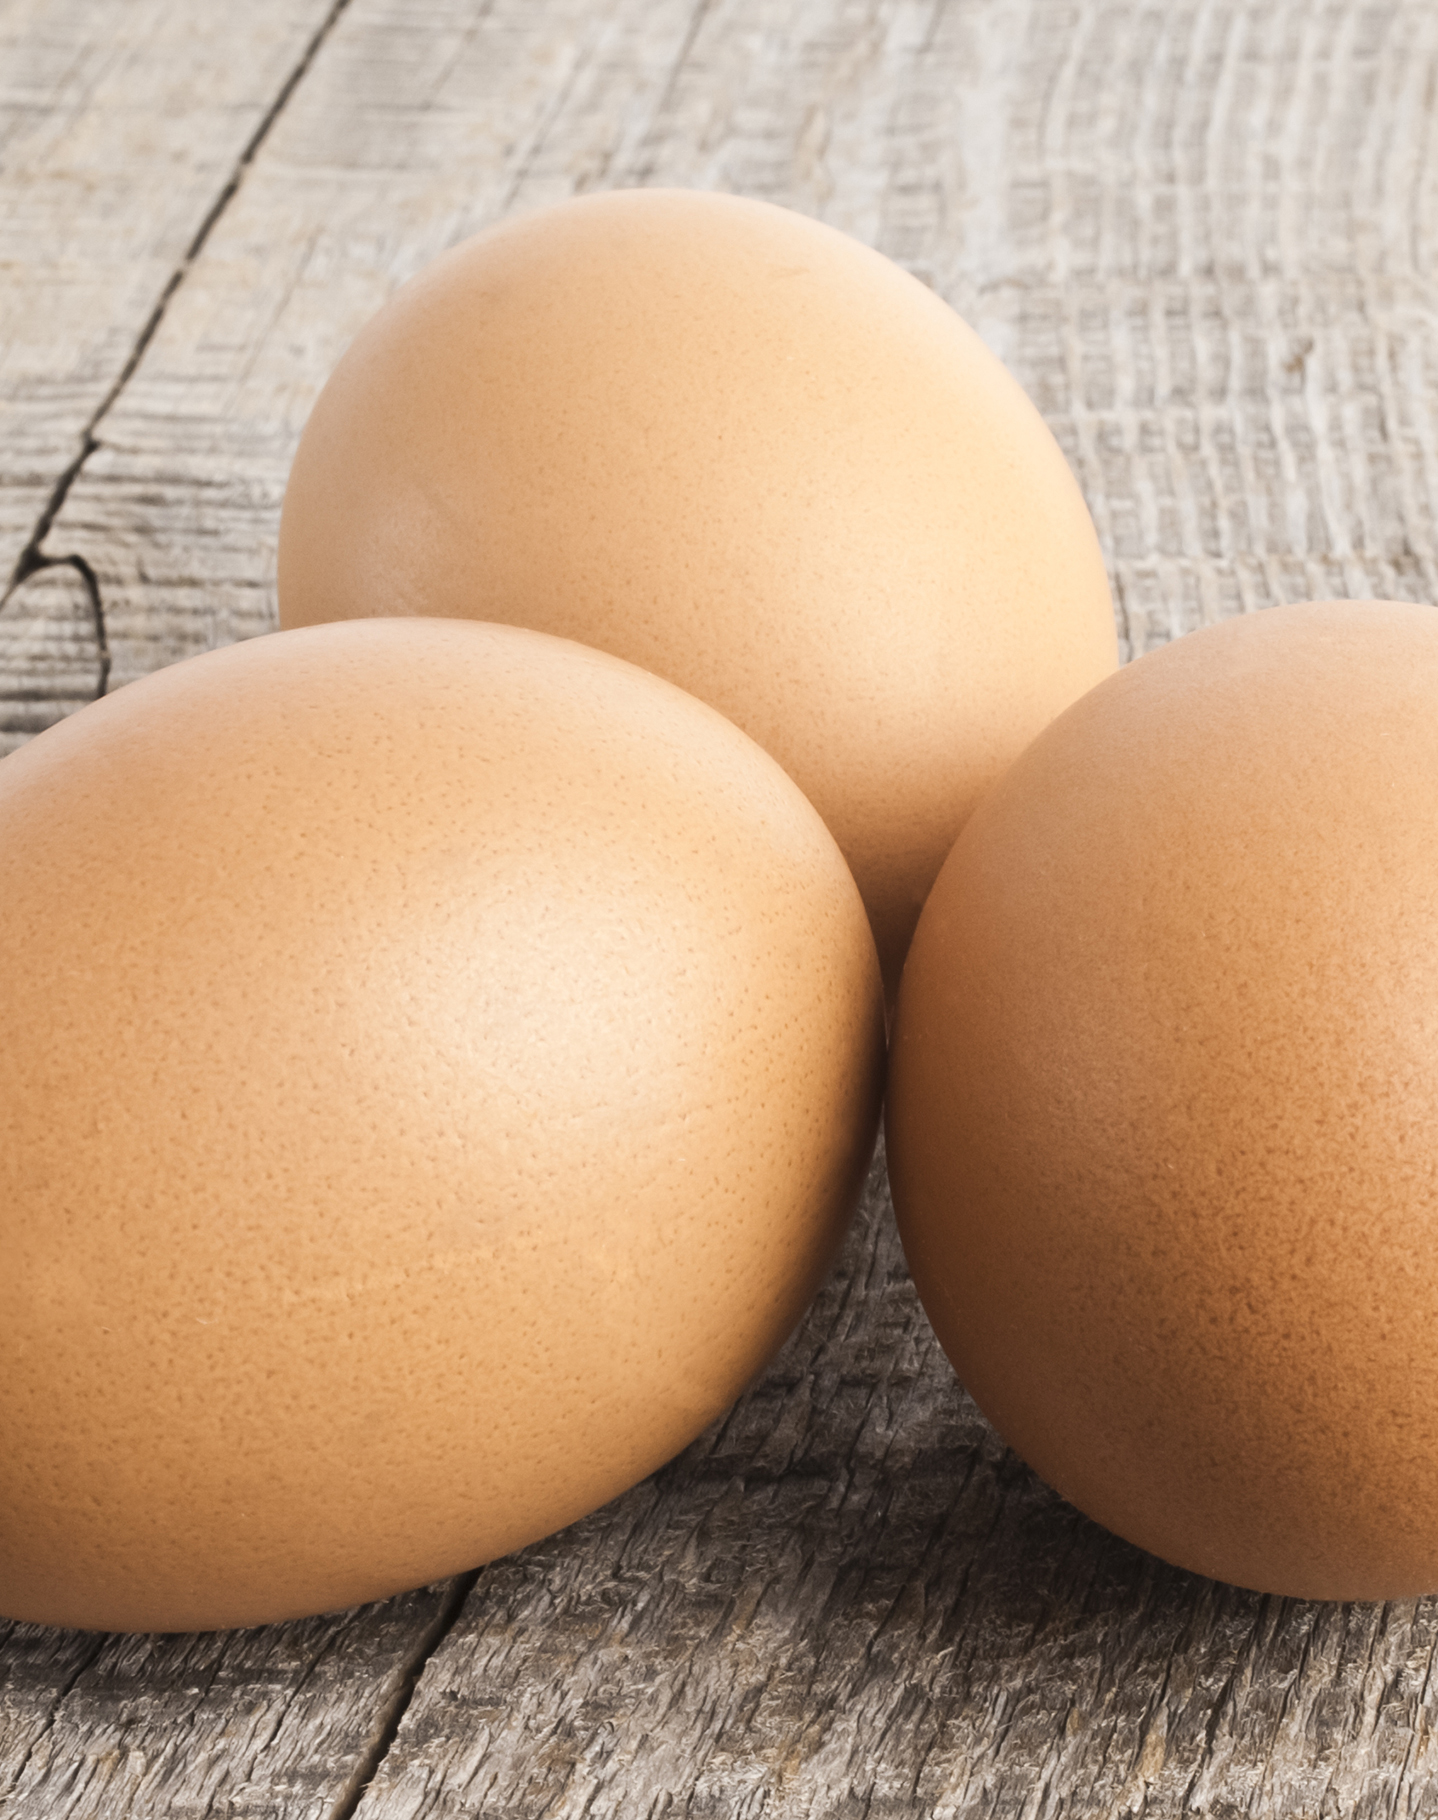 Unscrambling the Facts about Eggs